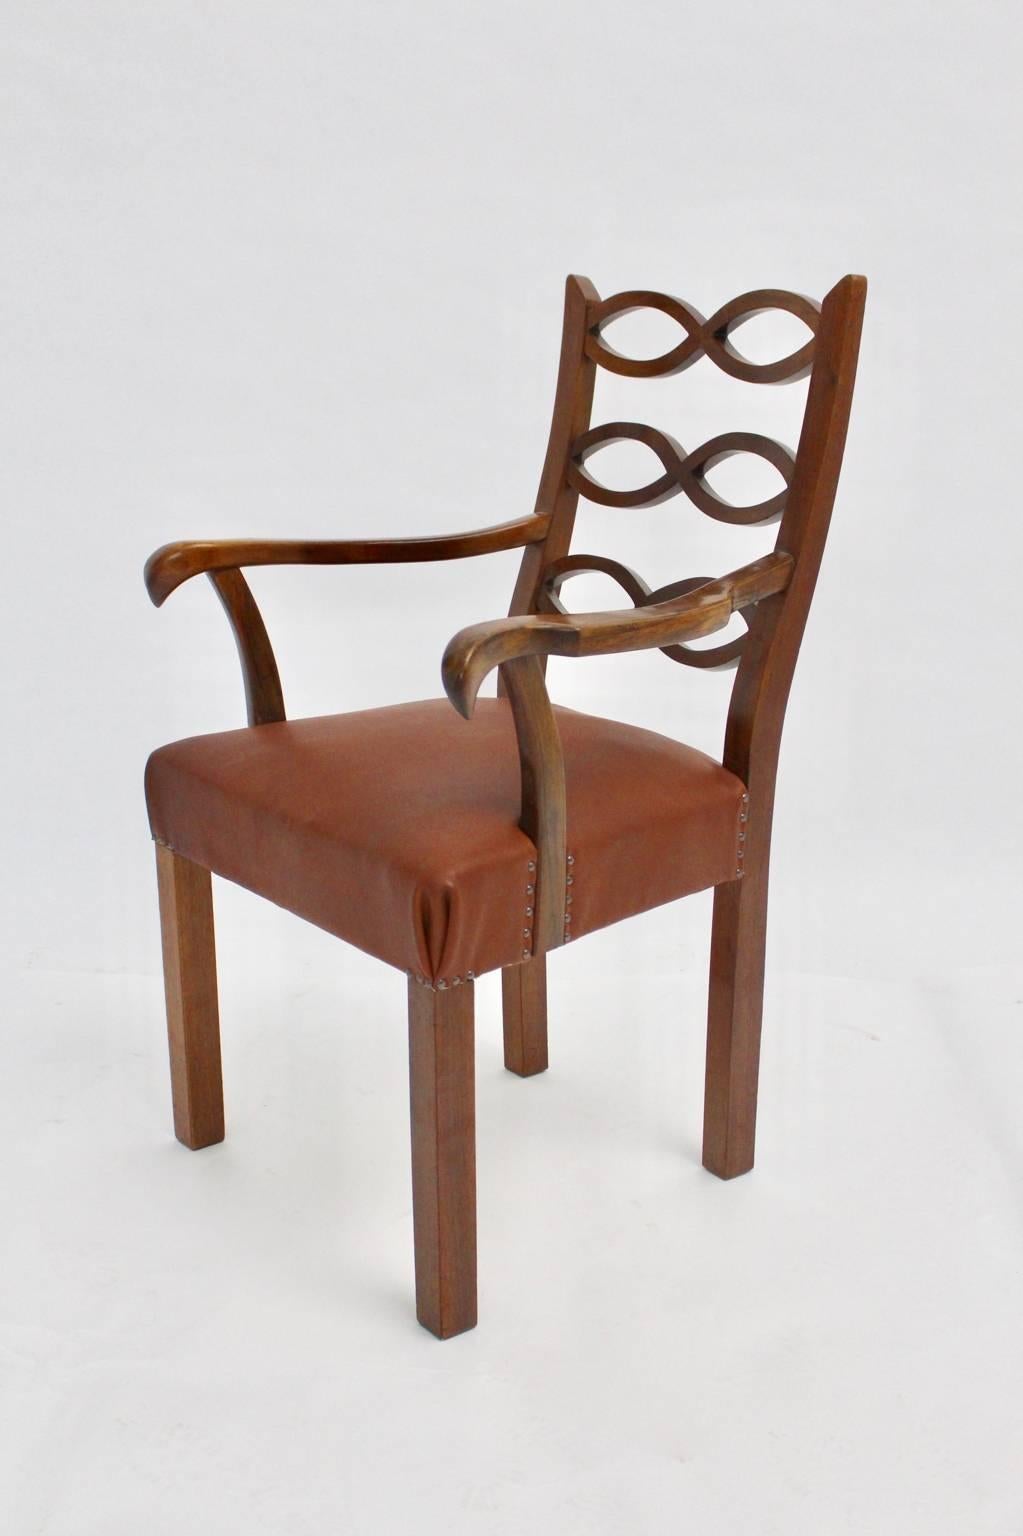 Art deco vintage armchair from walnut and leather designed by Hugo Gorge, circa 1920 in Vienna.
Hugo Gorge was an Austrian architect and a member of the Werkbund.
Especially to mentioned is his work and design for the Austrian Werkbund in